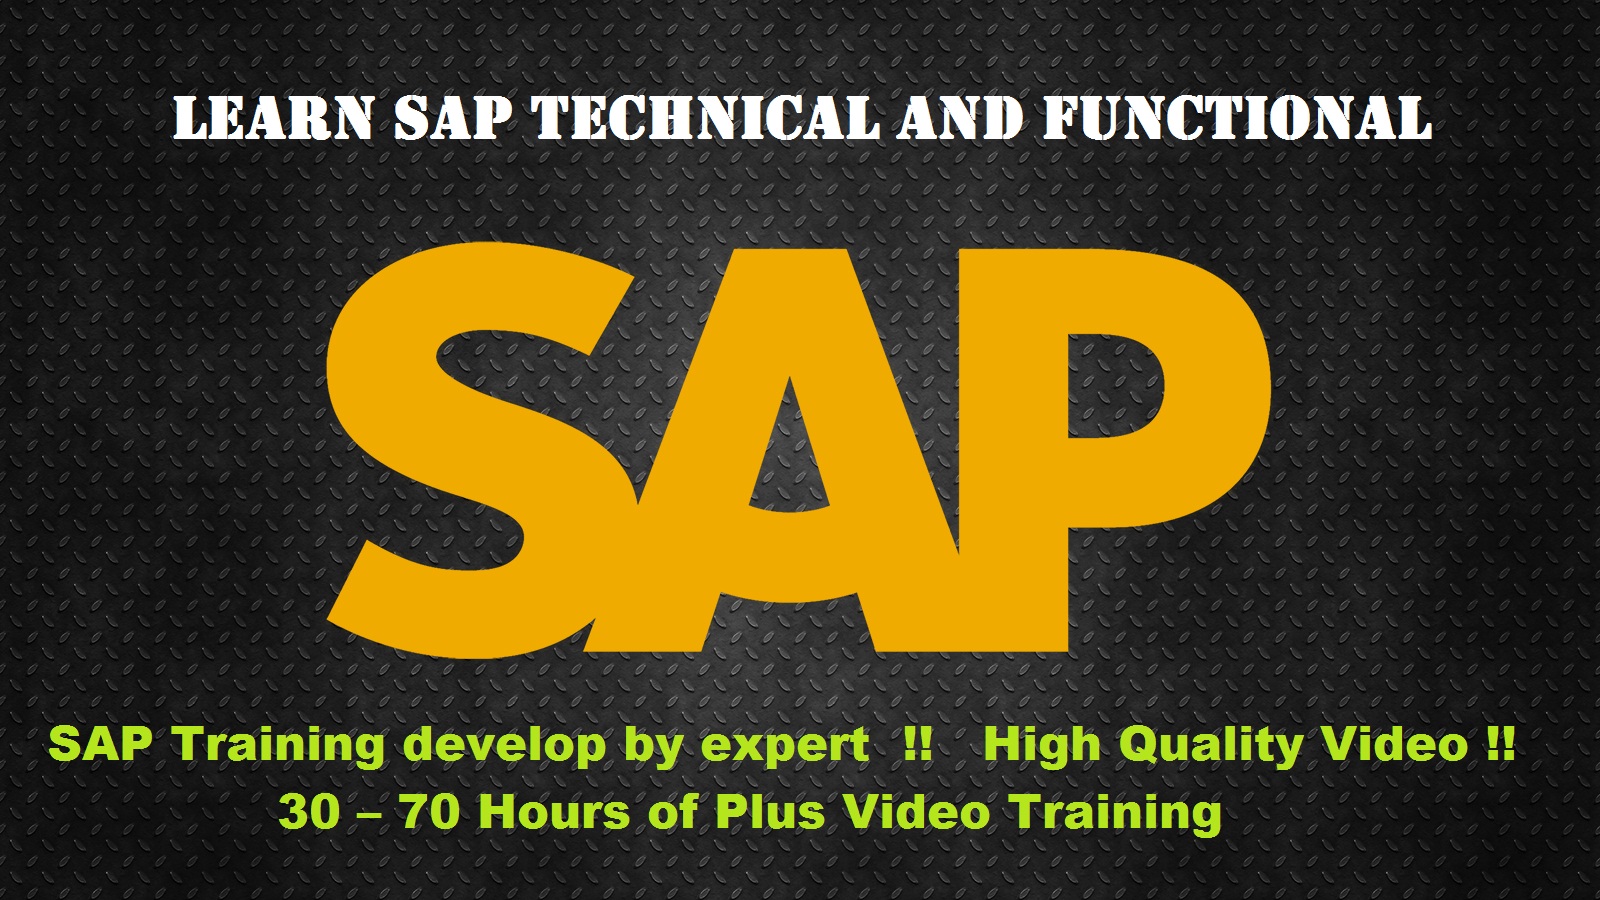 Sap video tutorialEducation and LearningProfessional CoursesEast DelhiOthers